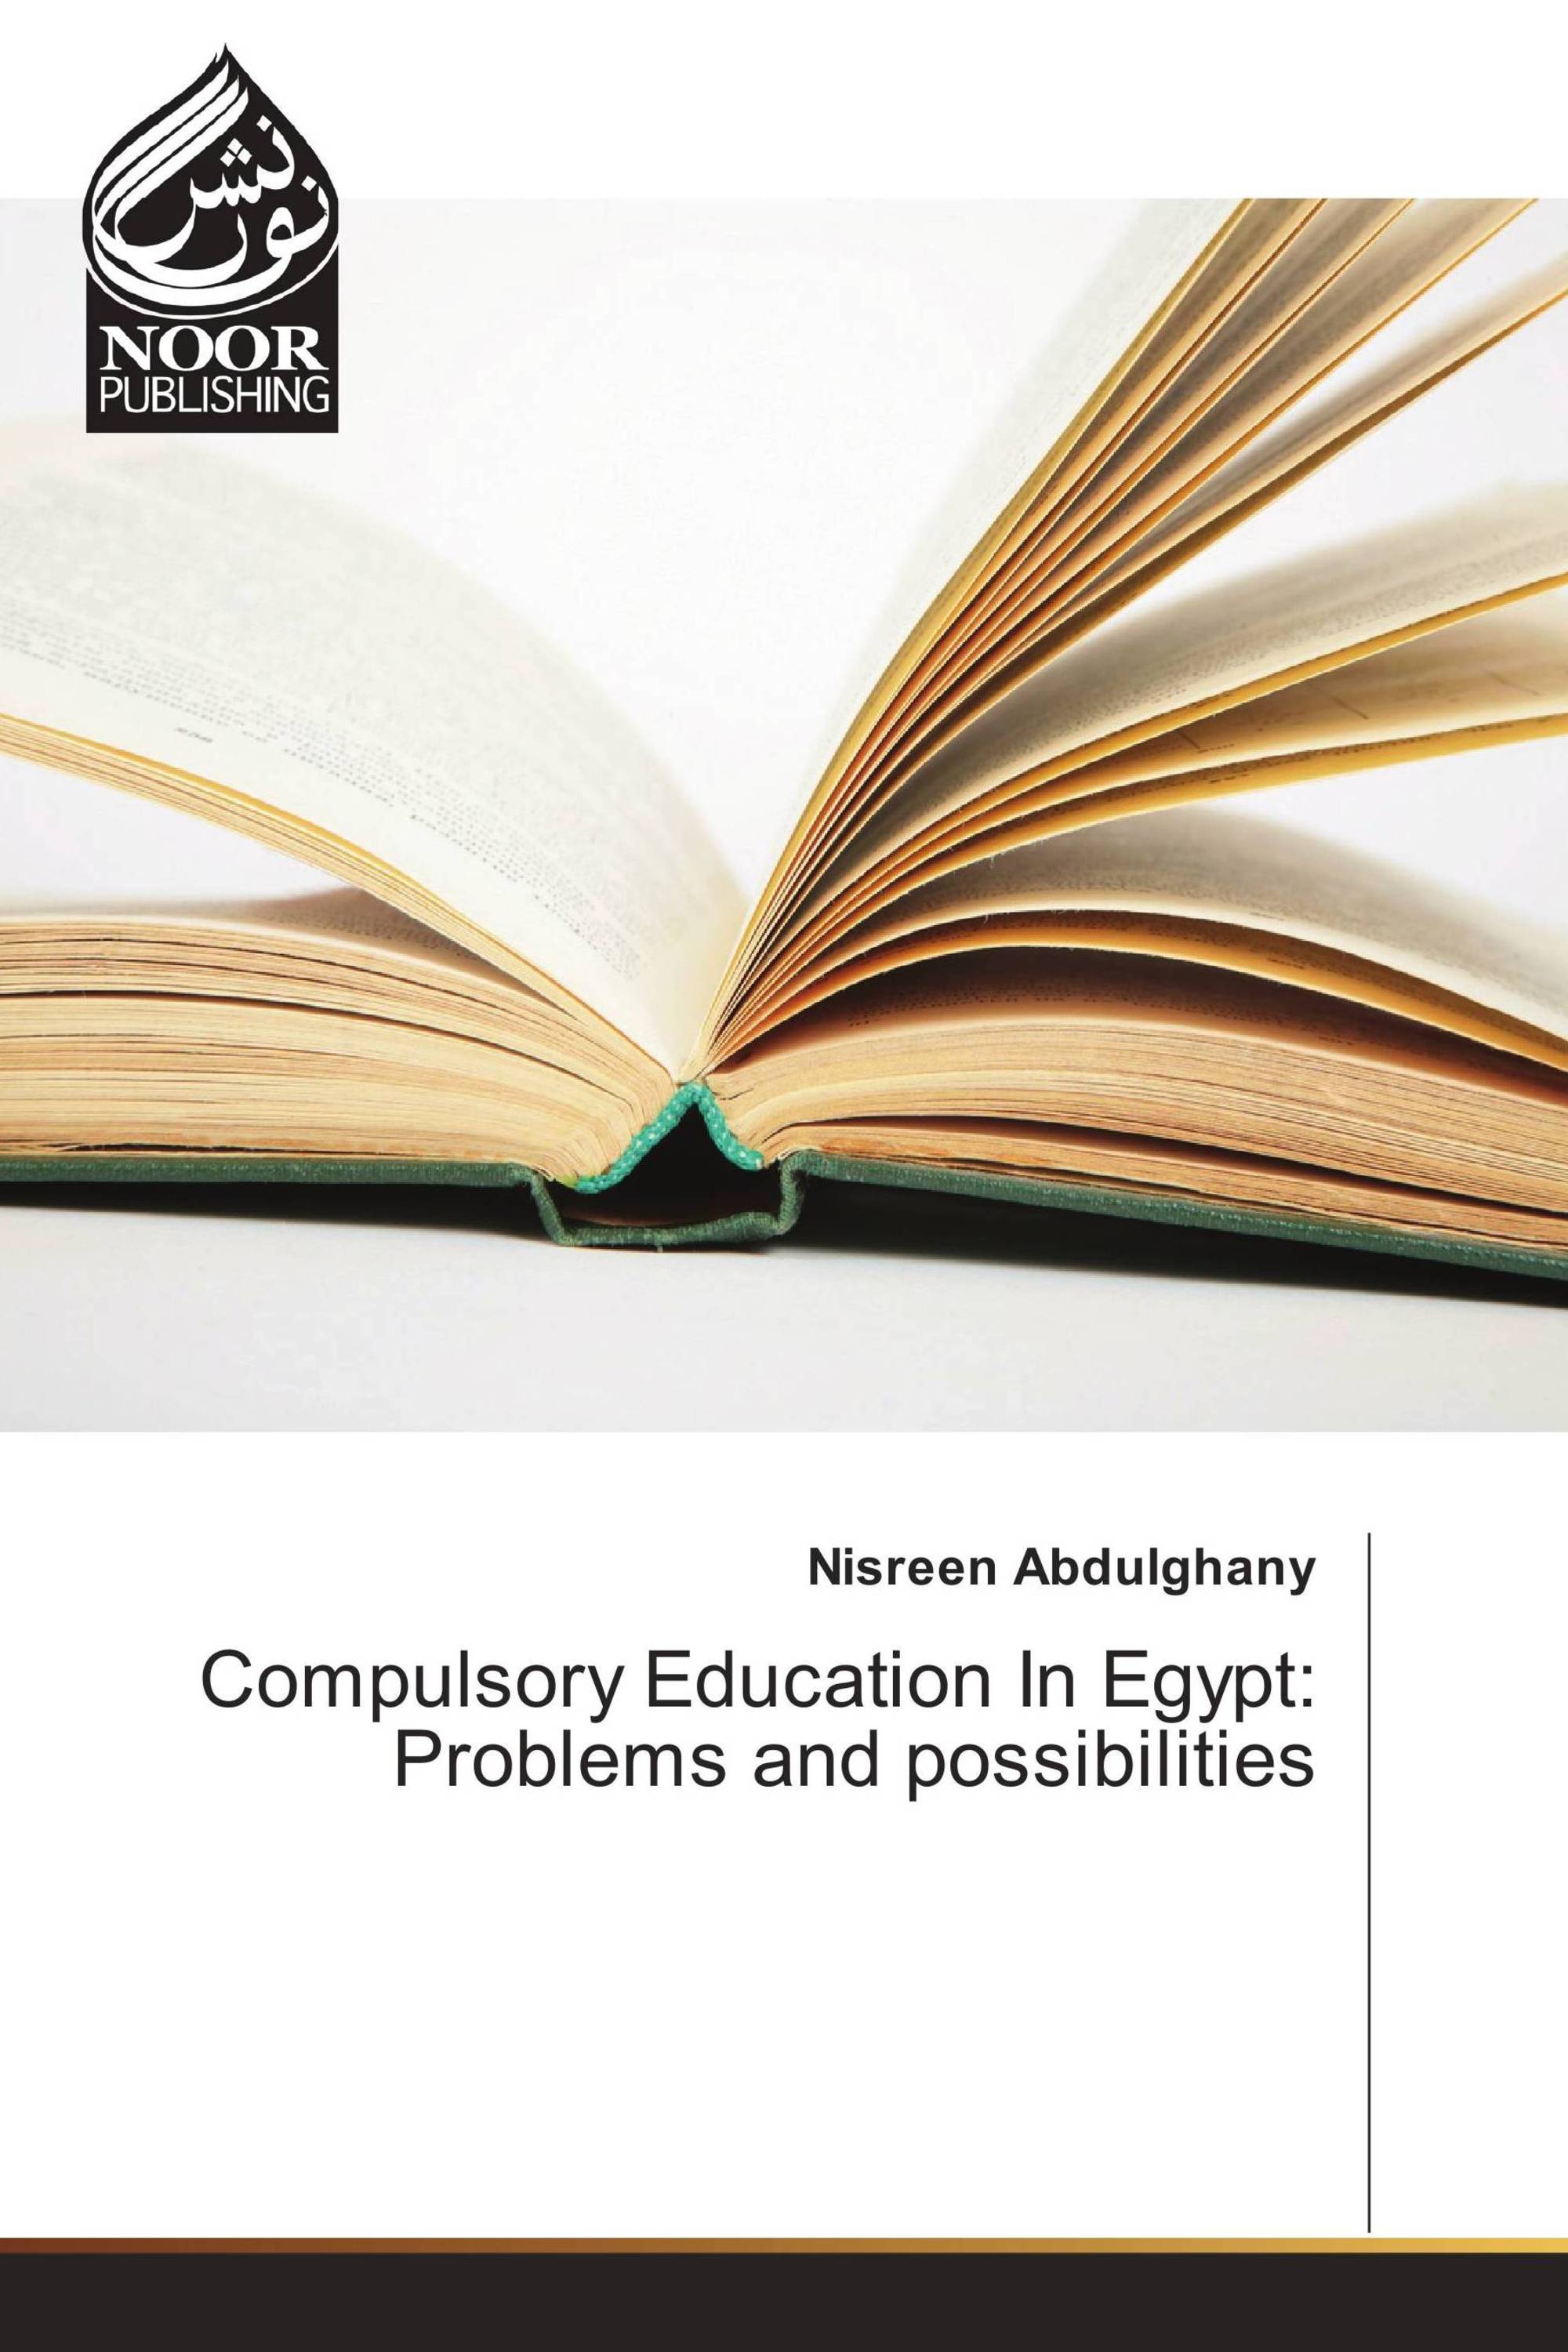 Compulsory Education In Egypt: Problems and possibilities